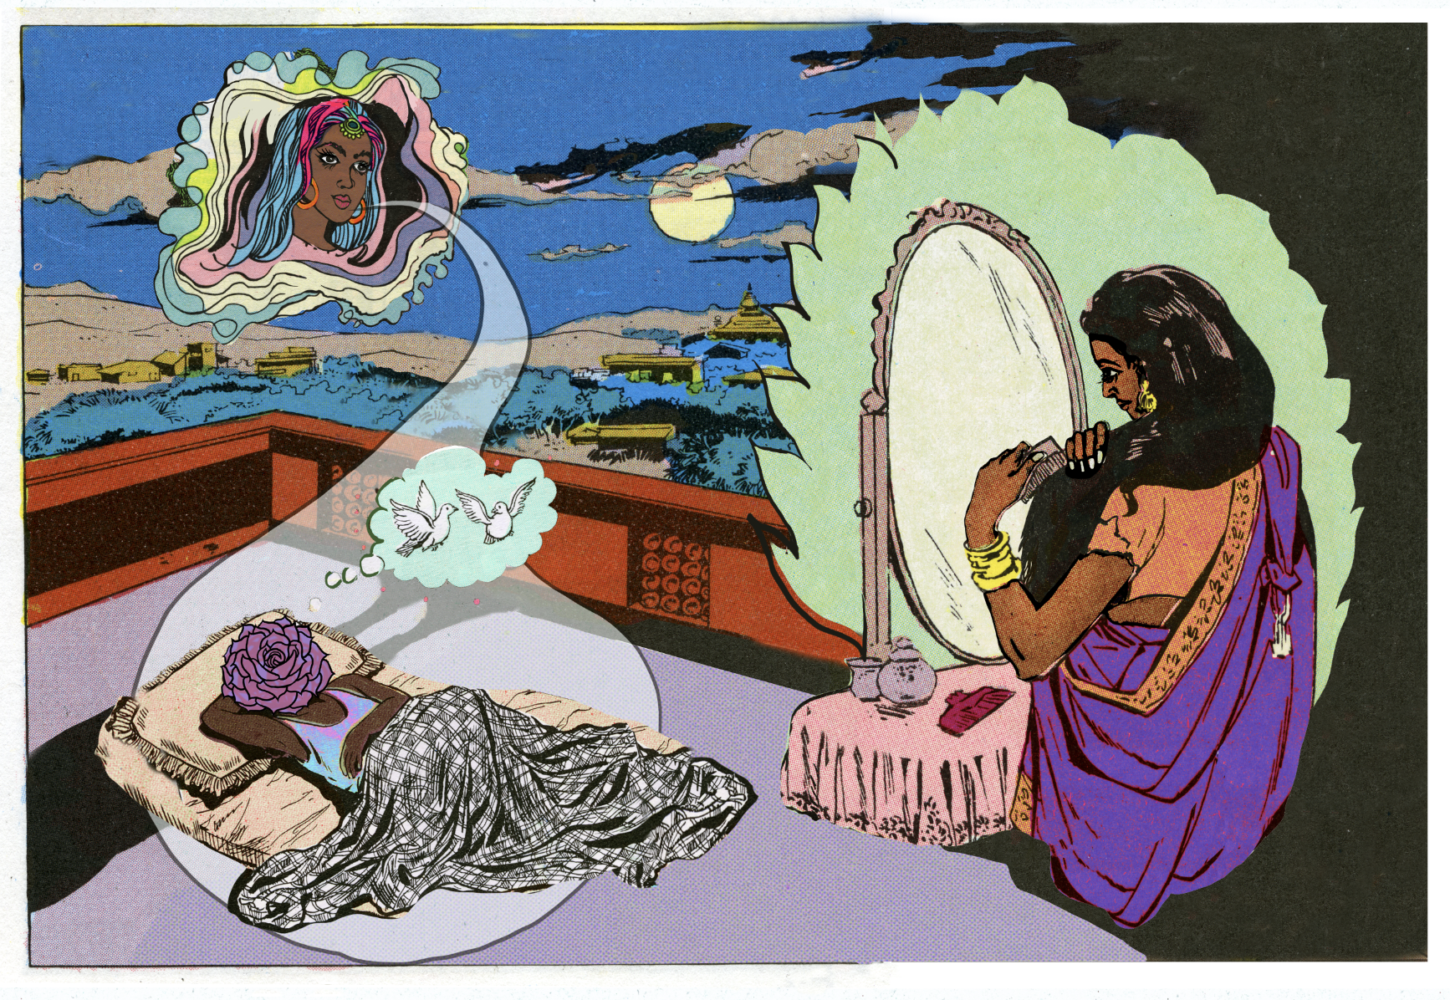 Chitra Ganesh, "Combing Hair on Balcony," courtesy of the artist.